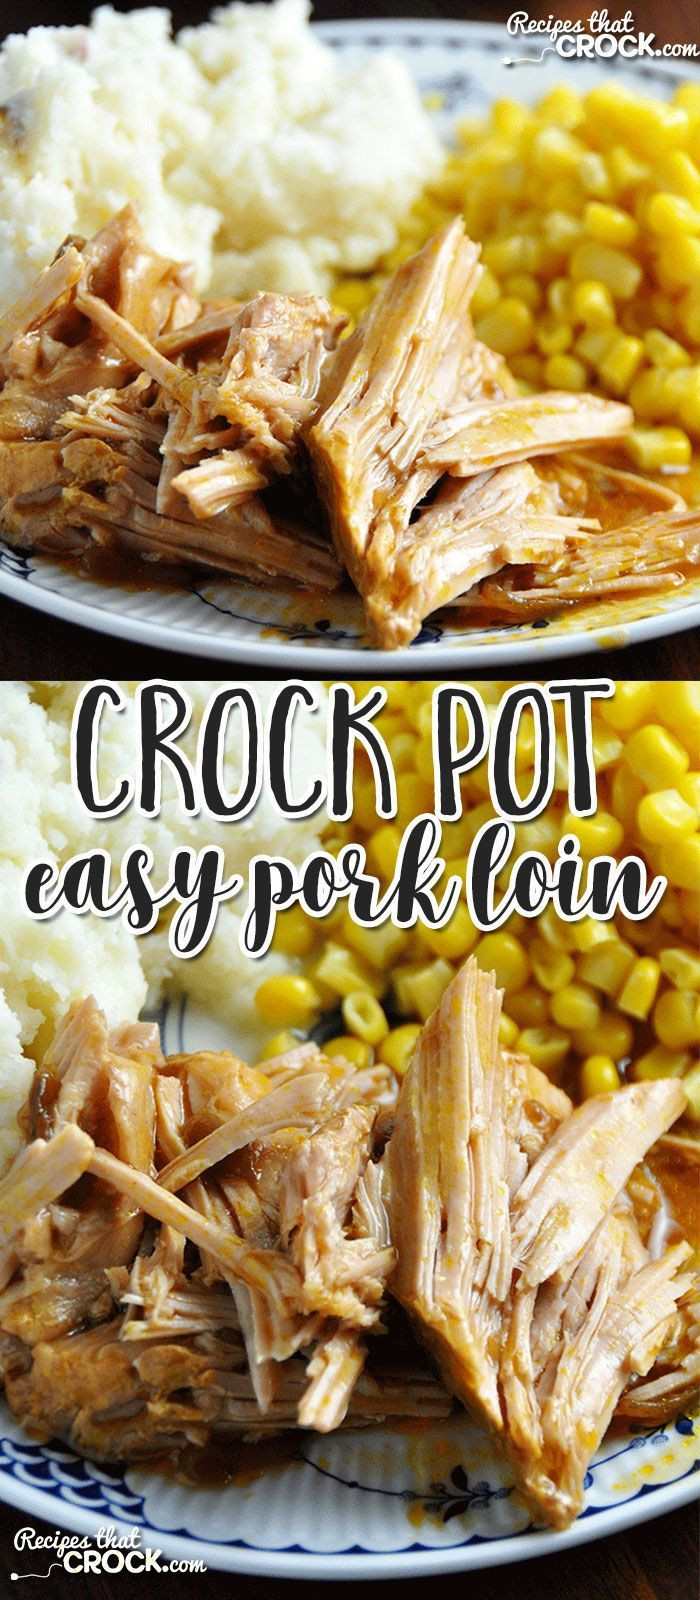 Slow Cooker Recipes Boneless Pork Loin
 The flavor of this Easy Crock Pot Pork Loin is amazing in